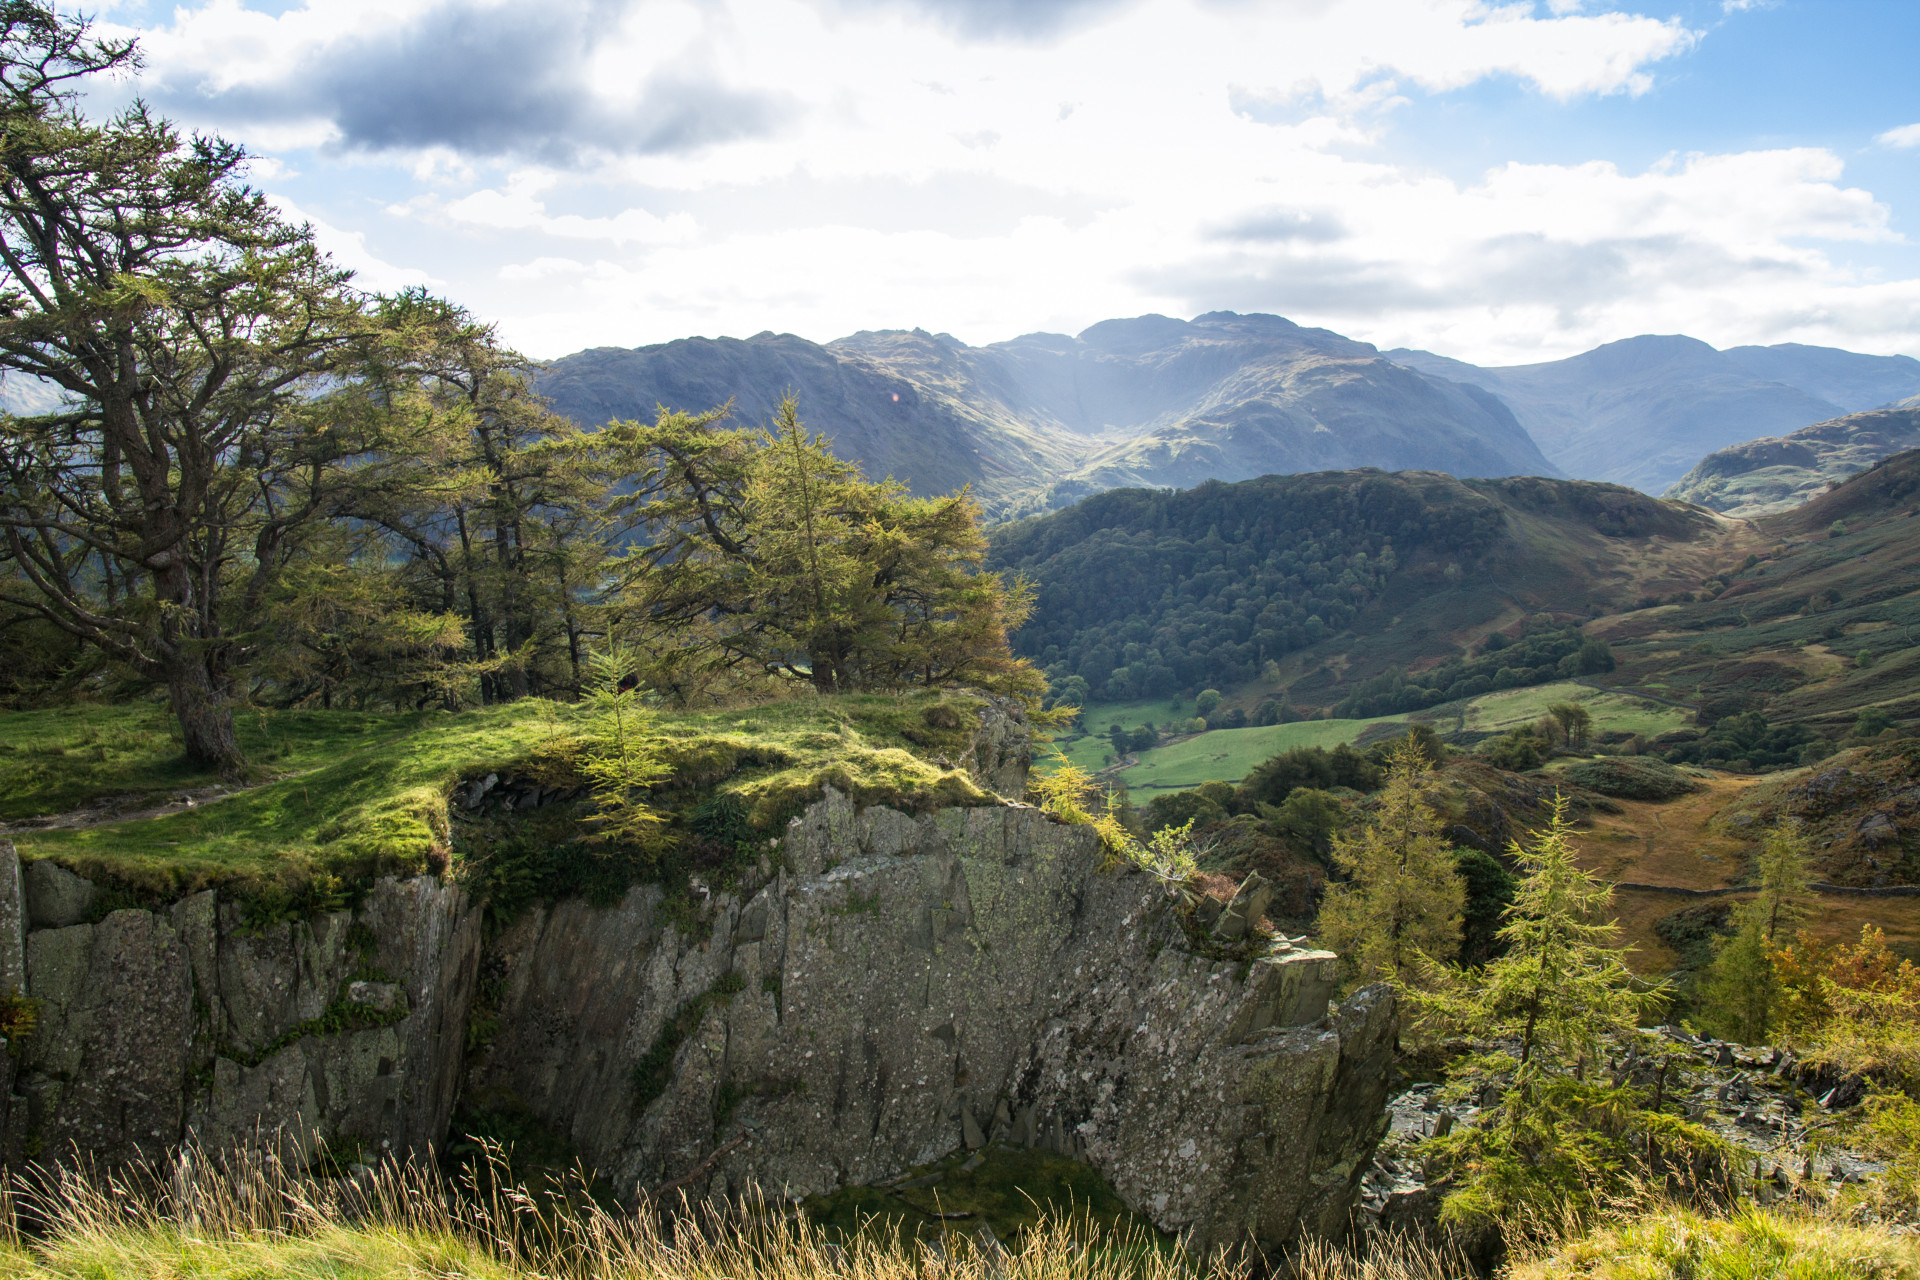 The drive from Borrowdale to Buttermere is filled with inspiring views and natural wonders.<p><a href="https://www.msn.com/en-us/community/channel/vid-7xx8mnucu55yw63we9va2gwr7uihbxwc68fxqp25x6tg4ftibpra?cvid=94631541bc0f4f89bfd59158d696ad7e">Follow us and access great exclusive content every day</a></p>